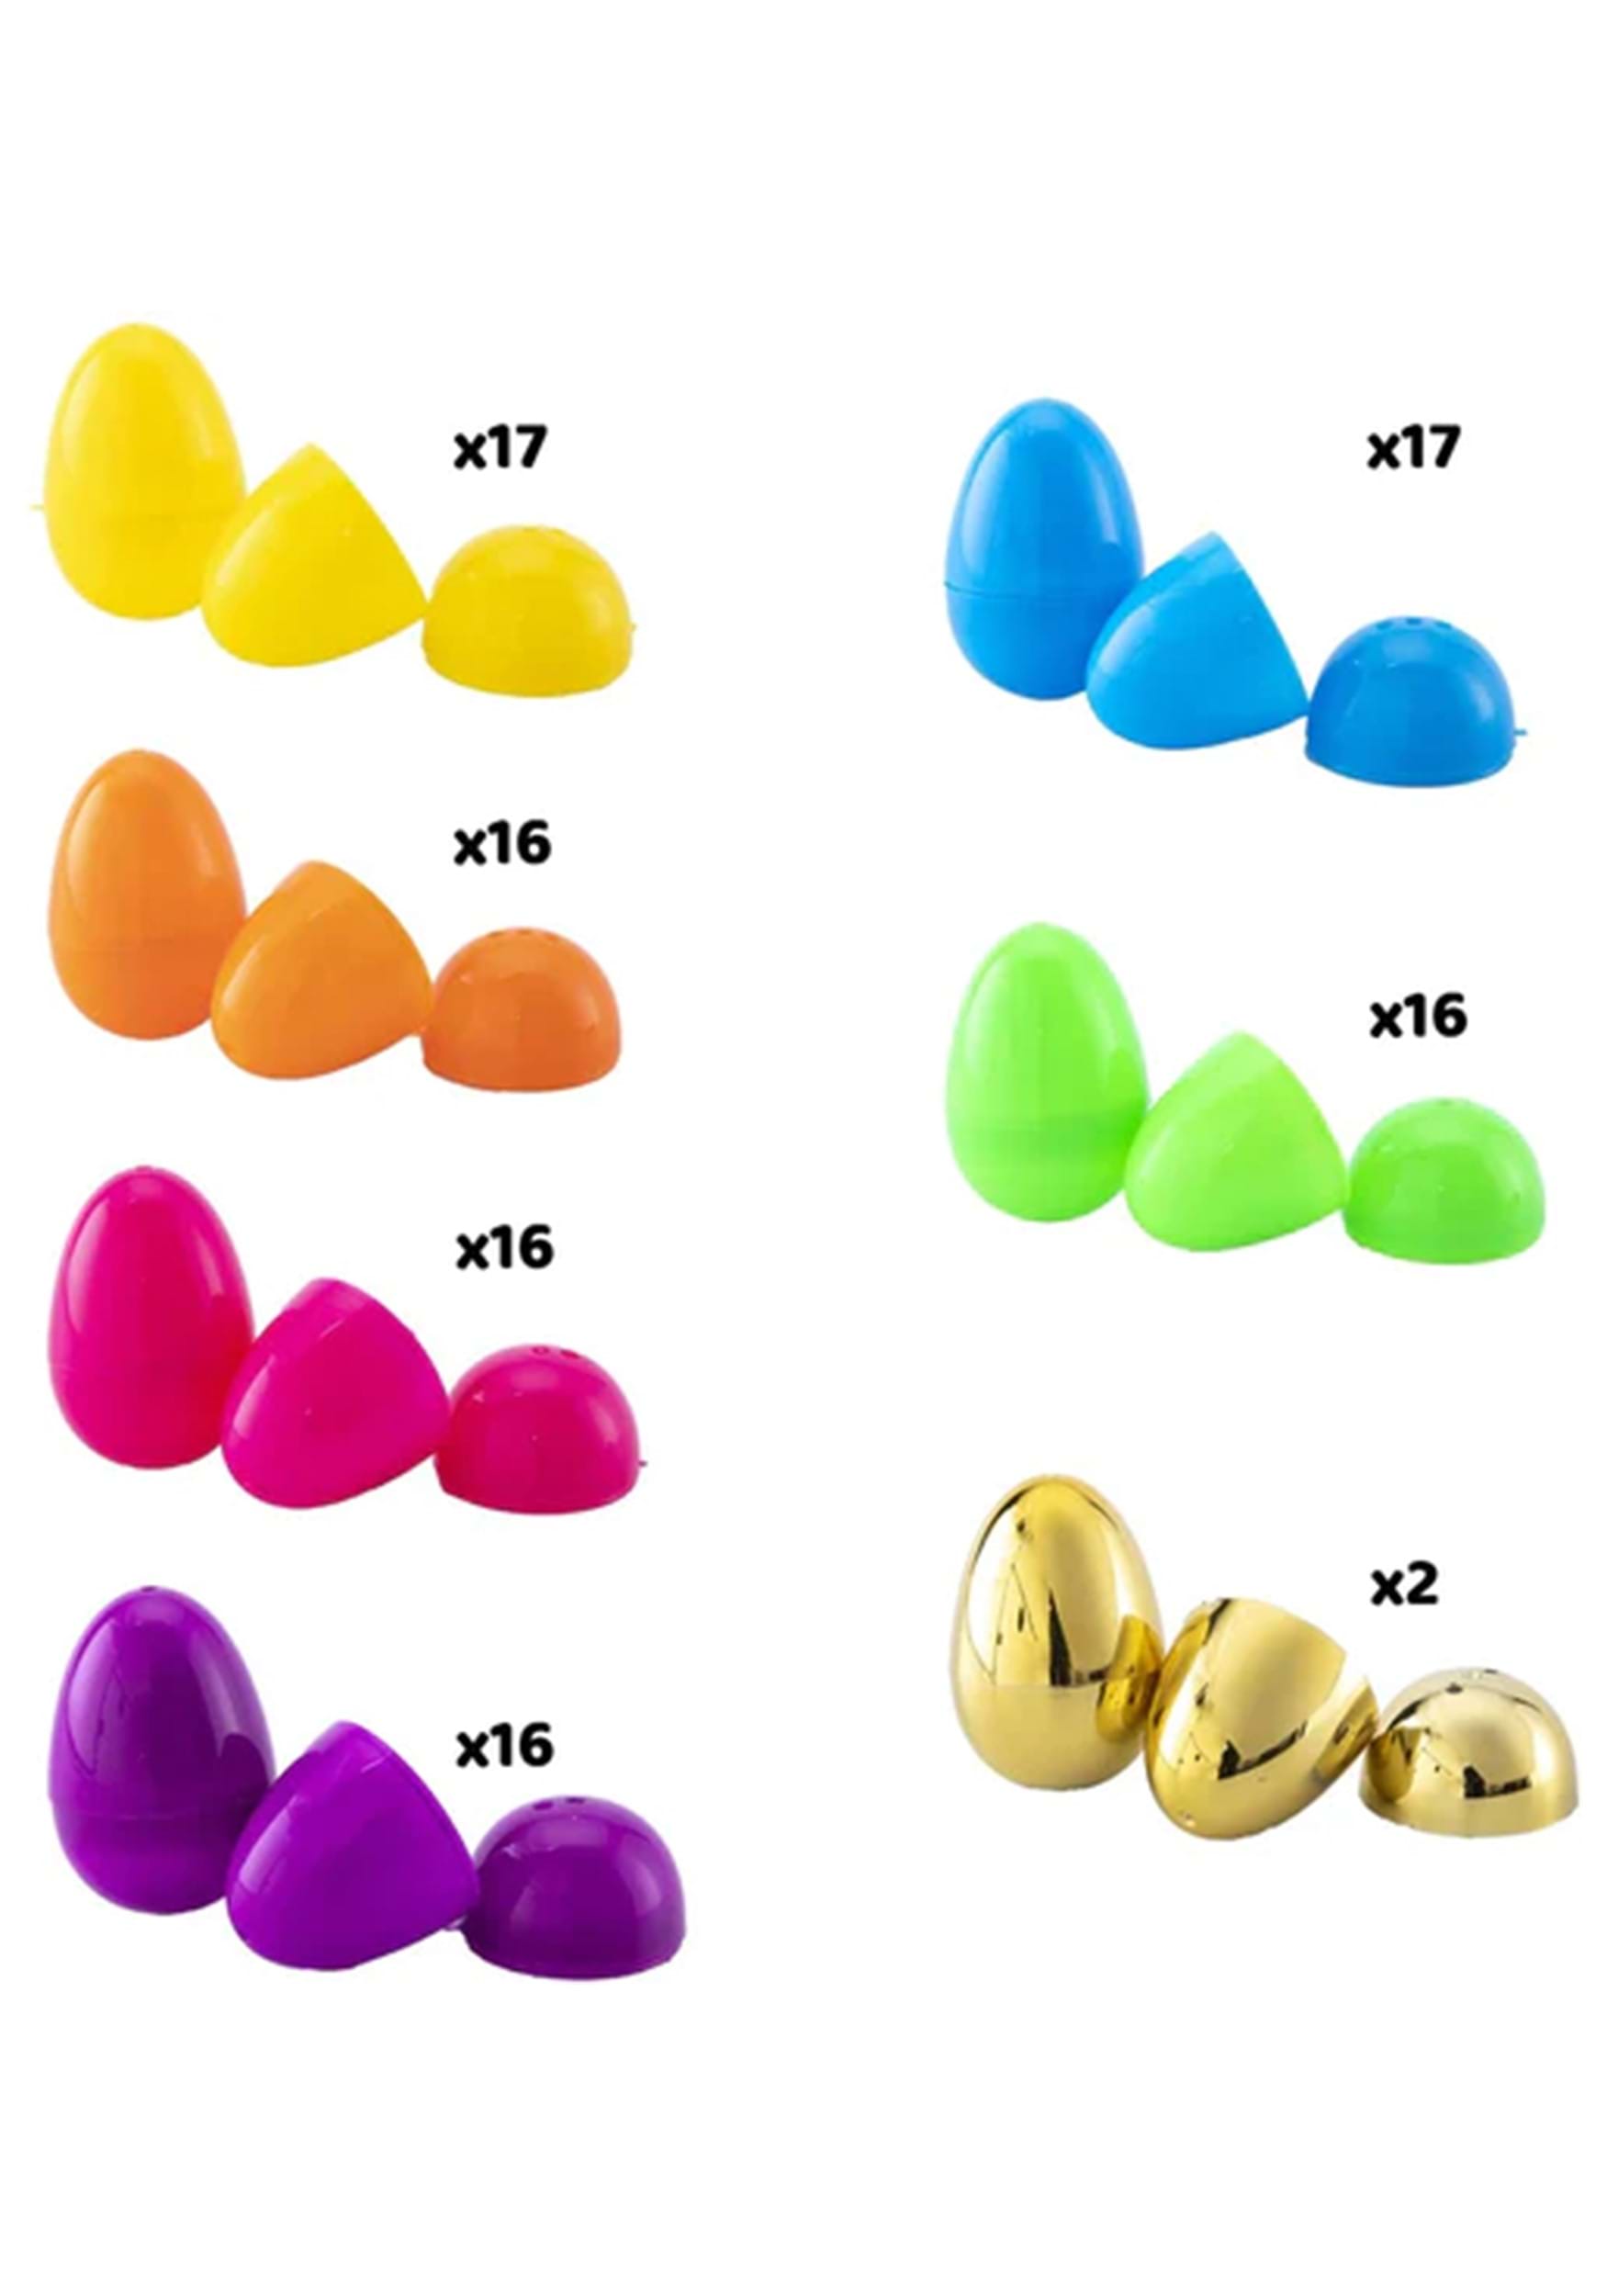 100 Piece Classic Colorful Egg Shells , Easter Egg Hunt Accessories